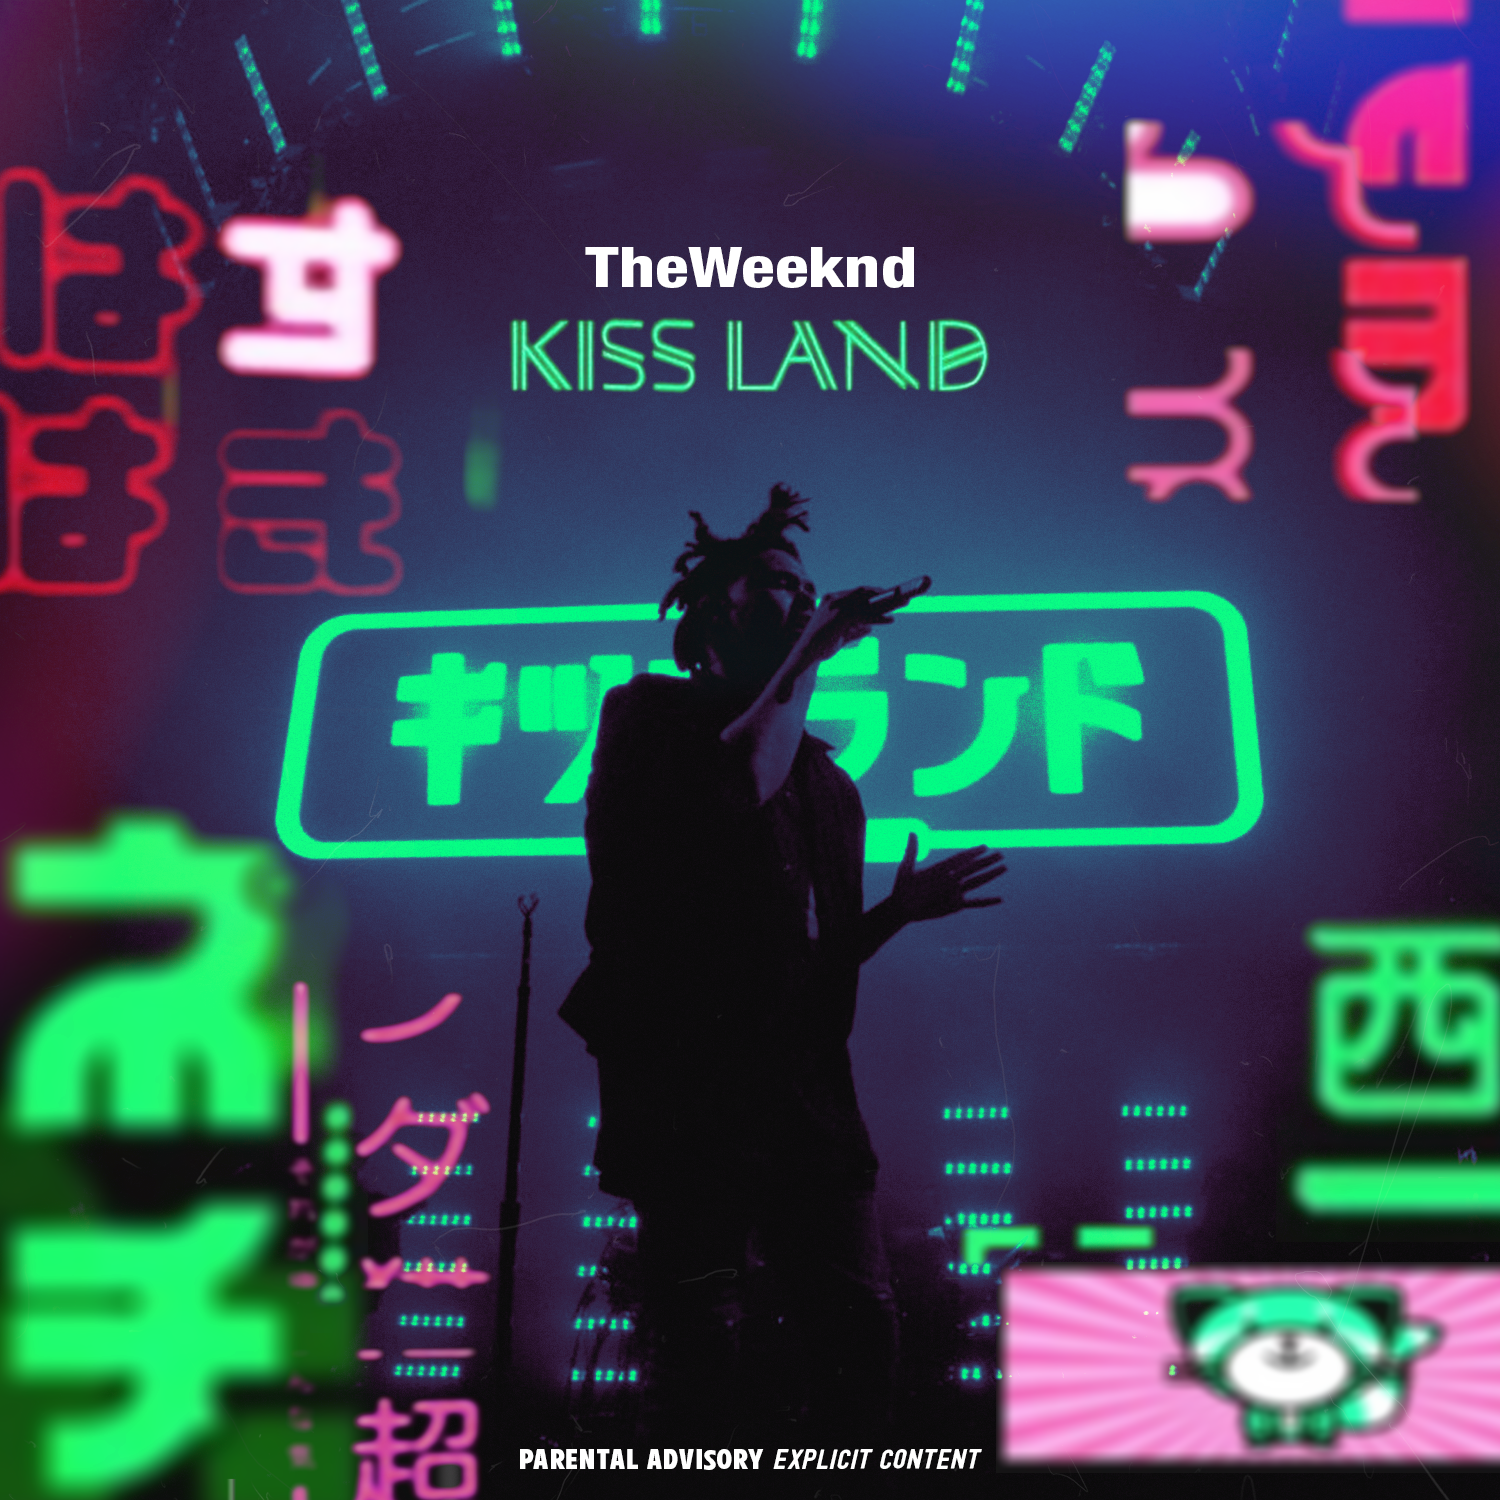 The Weeknd Land. The weeknd poster, Kiss land, The weeknd